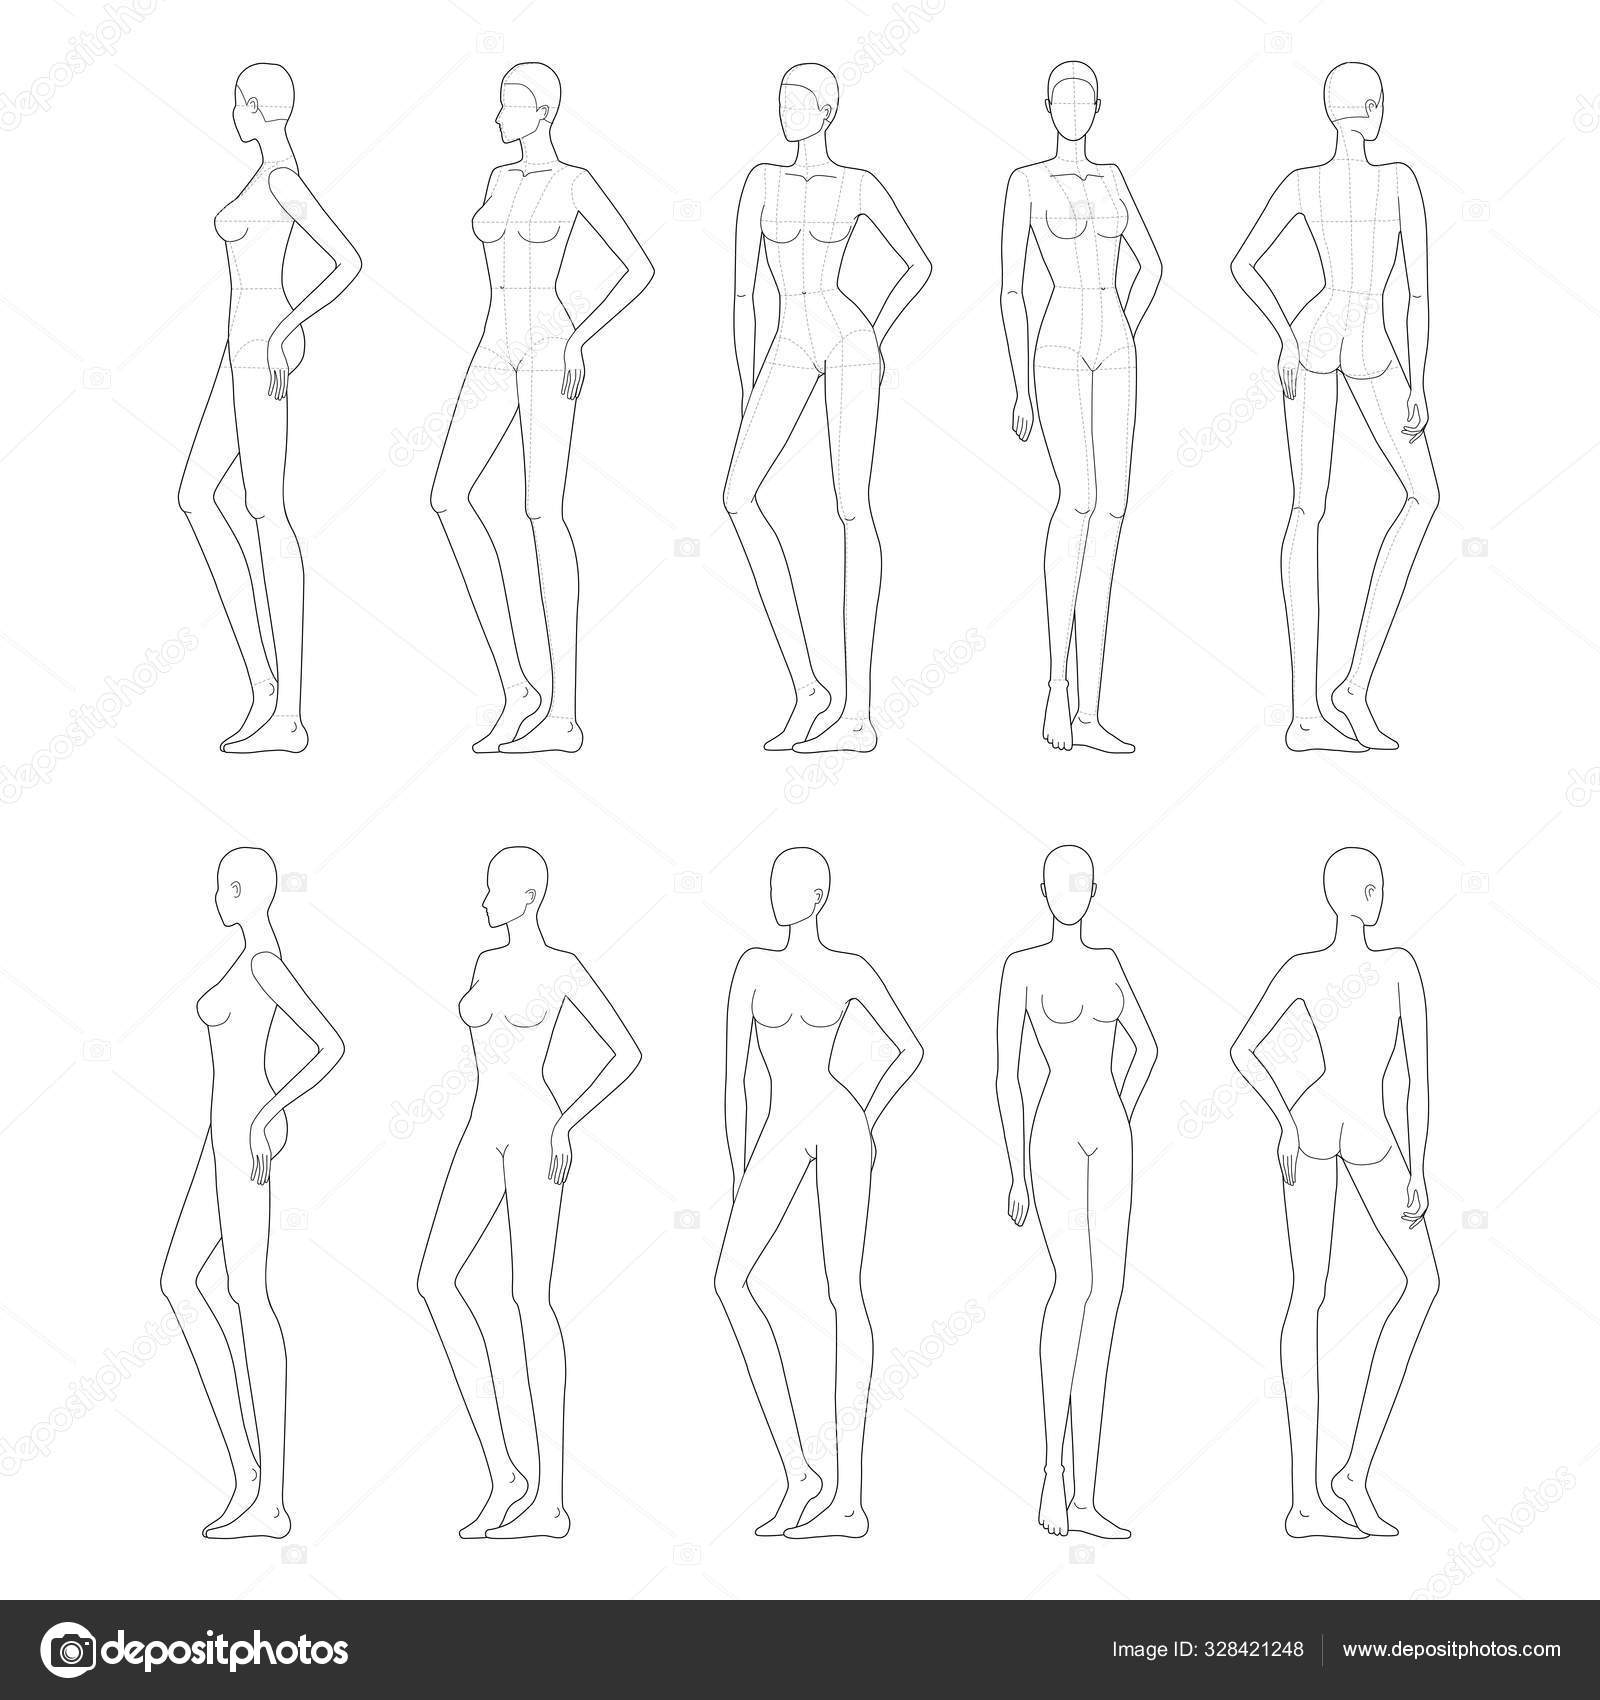 30 Cute Standing Poses That You Can't Live Without - Feminine Buzz |  Clothing photography, Fashion model poses, Fashion sketches dresses